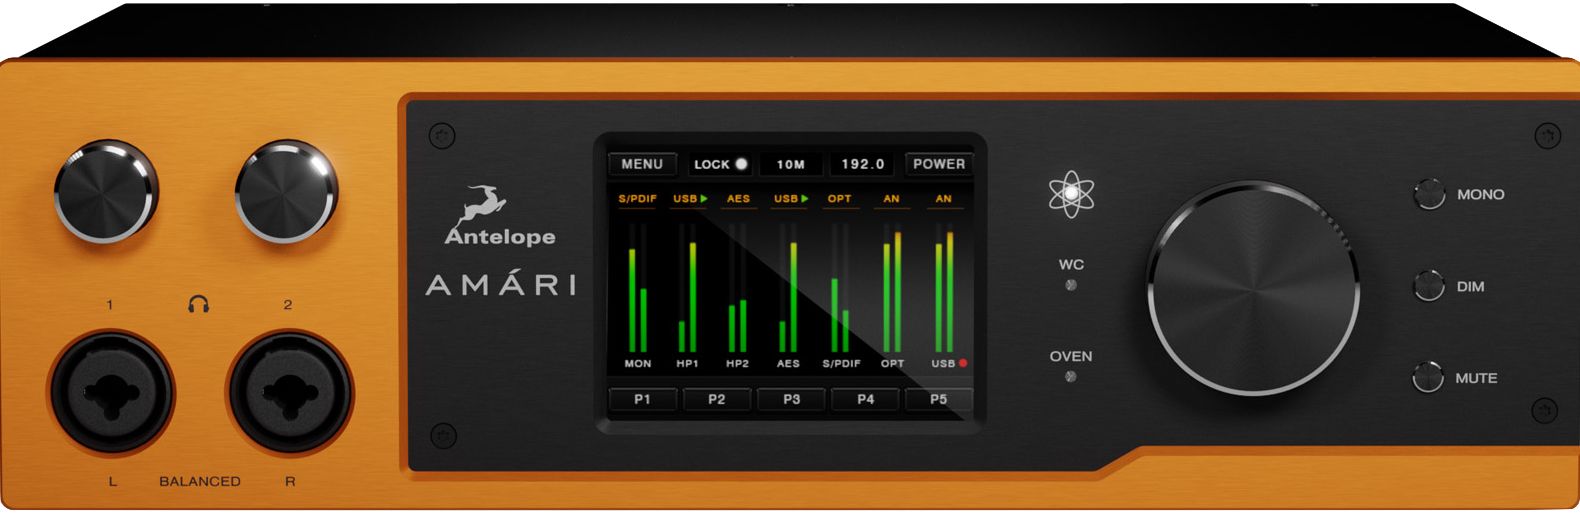 Review: Antelope Amari - An Audio Interface Designed For Mastering